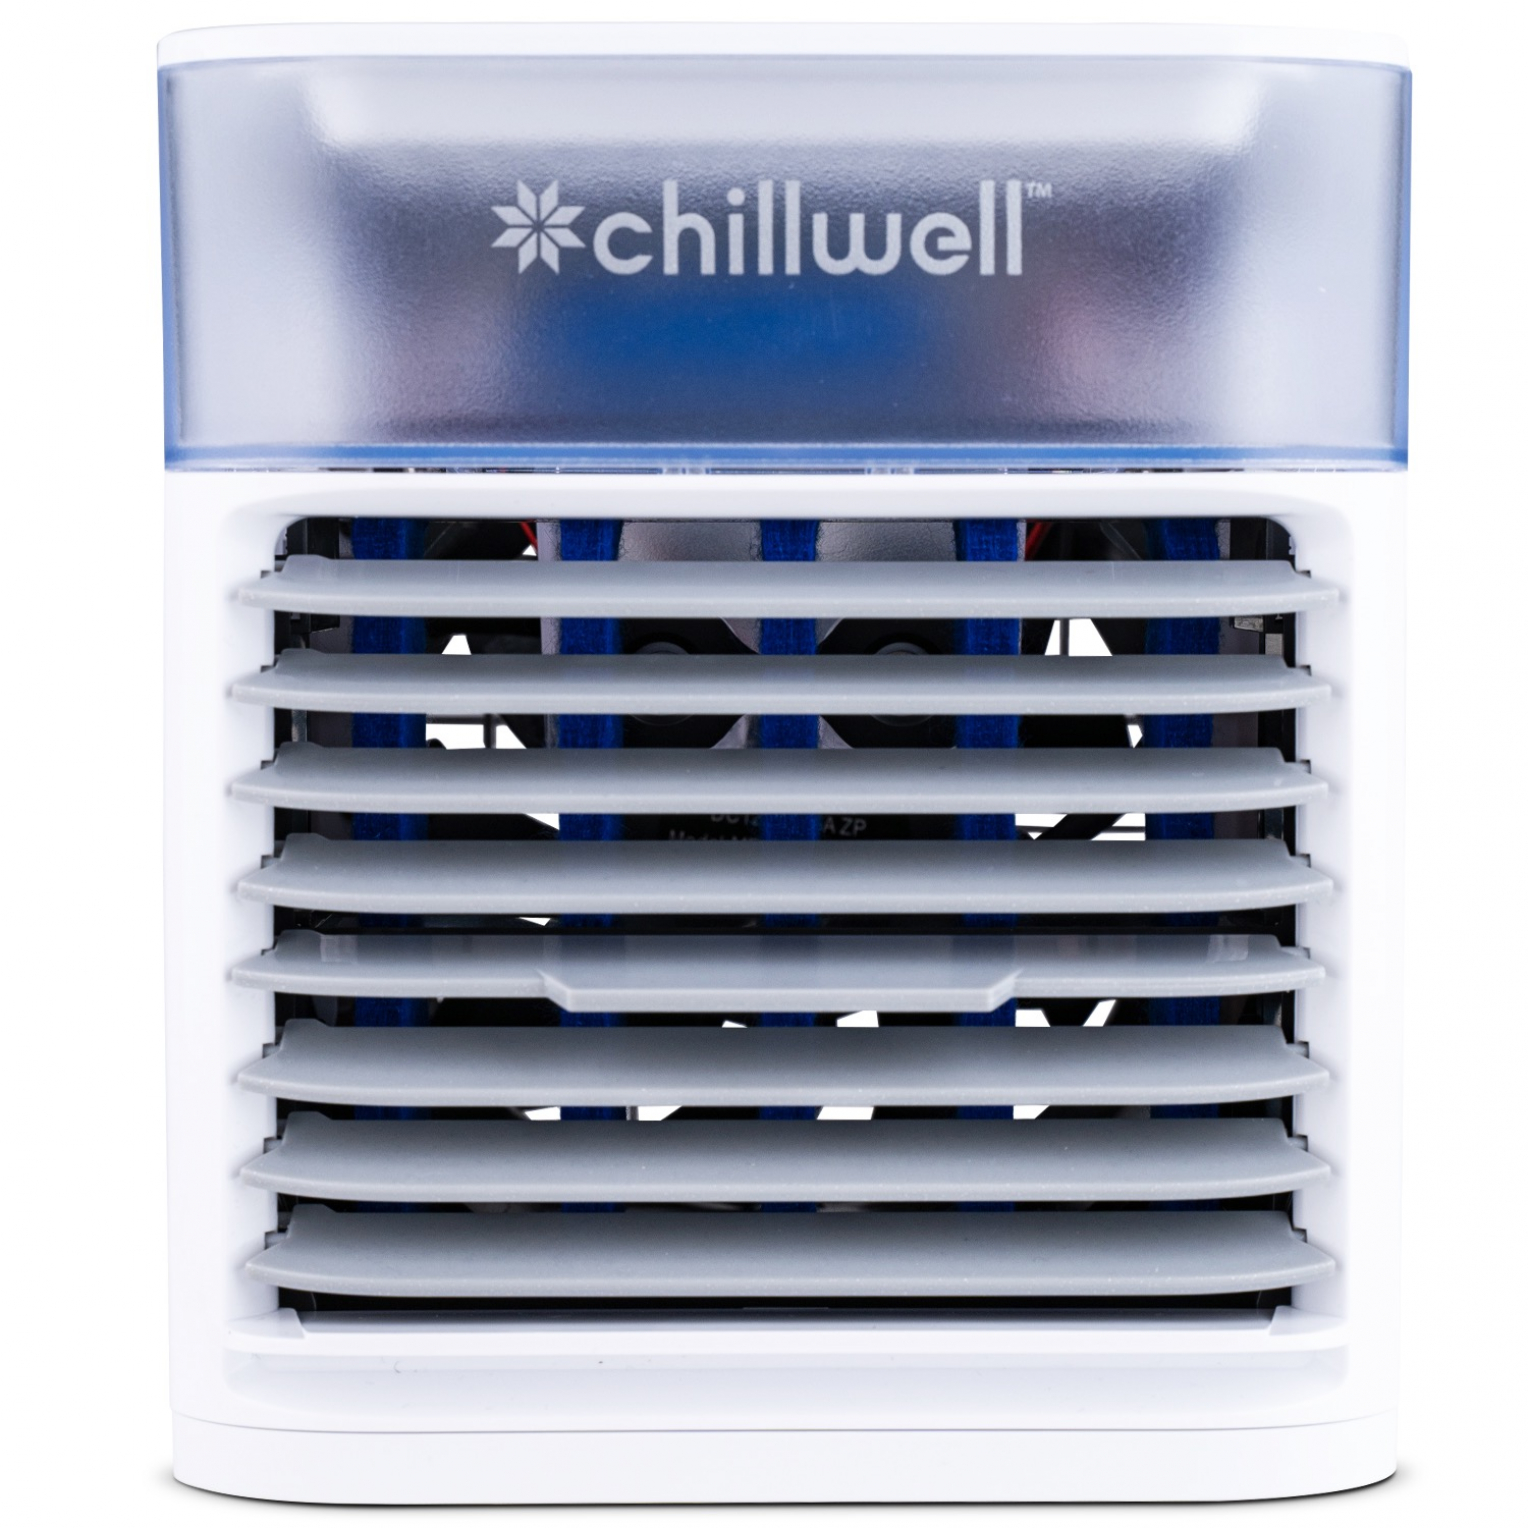 Chillwell AC Evaporative Air Cooler